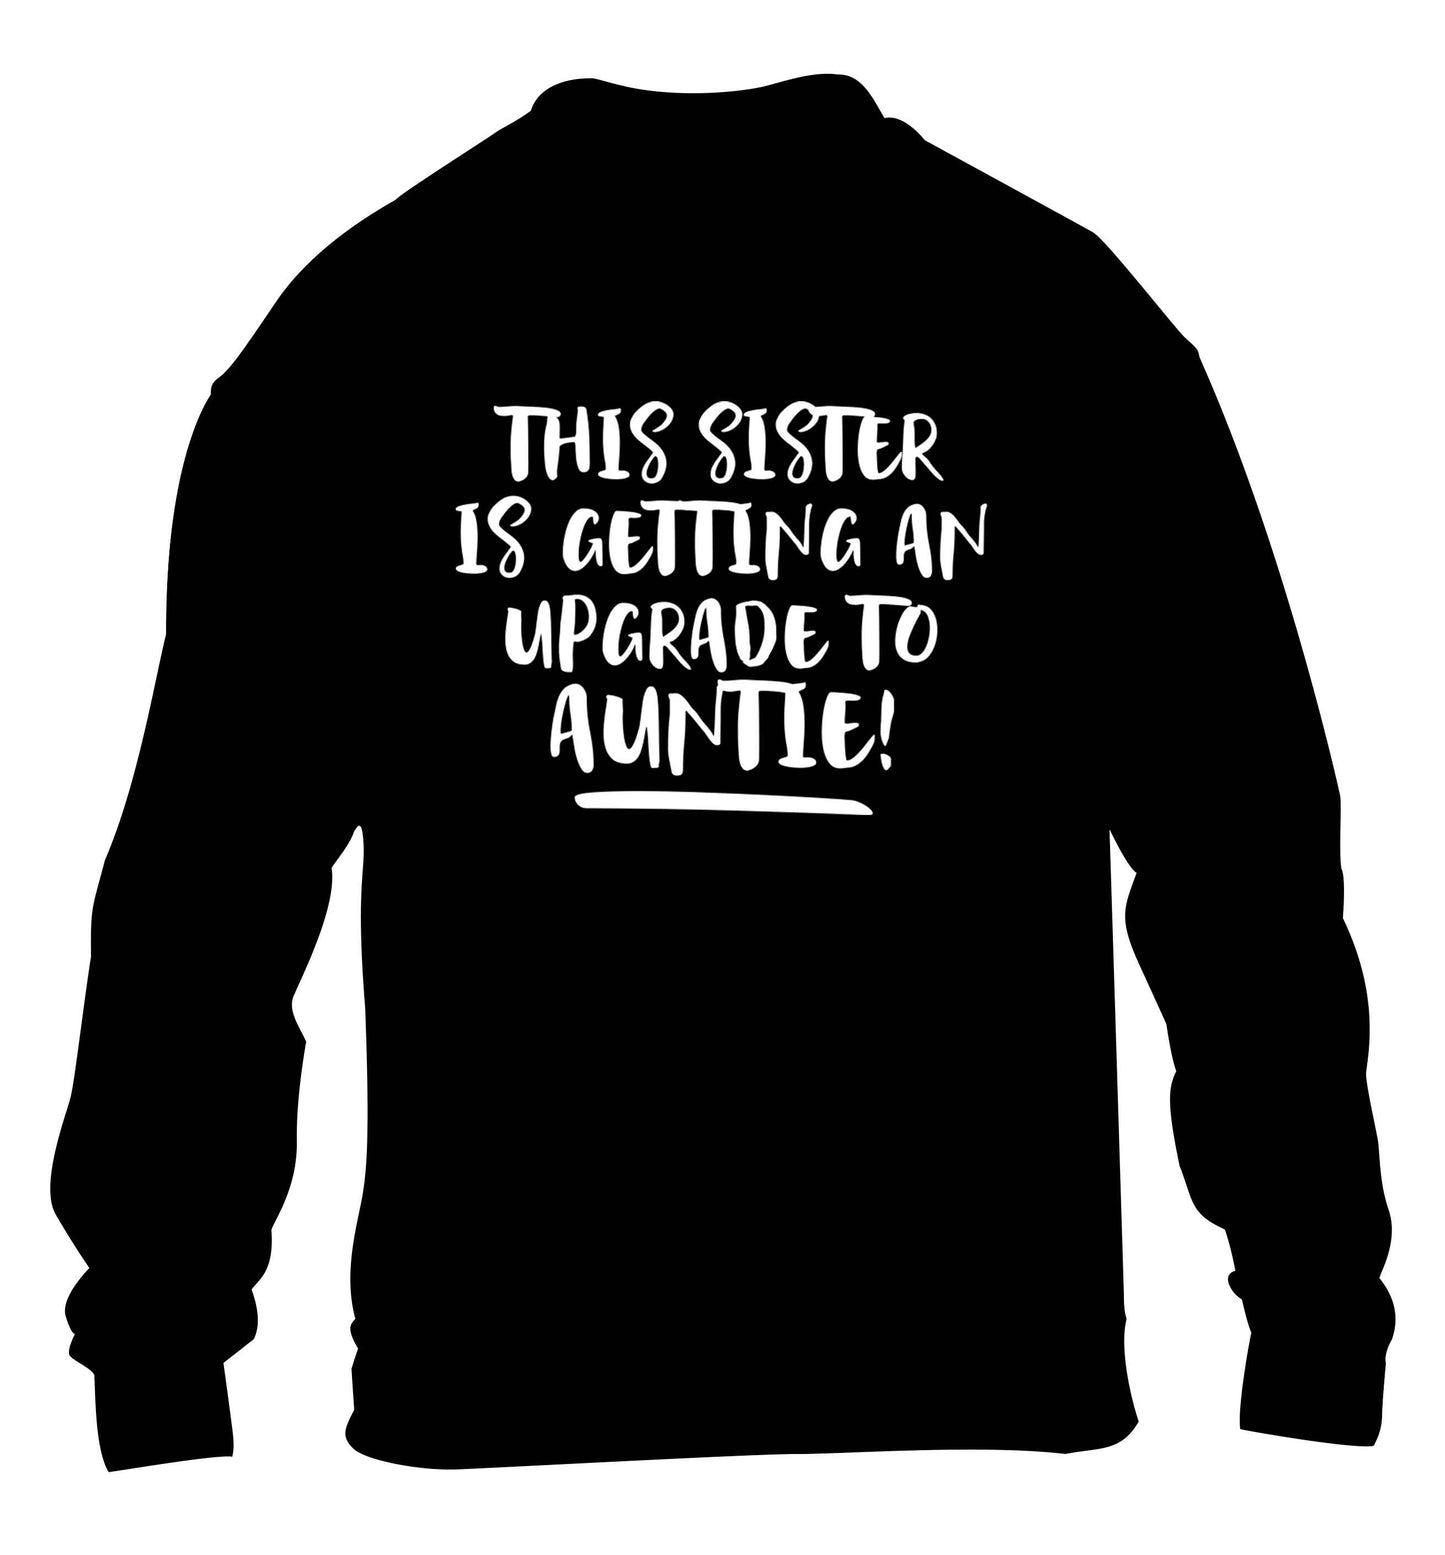 This sister is getting an upgrade to auntie! children's black sweater 12-13 Years